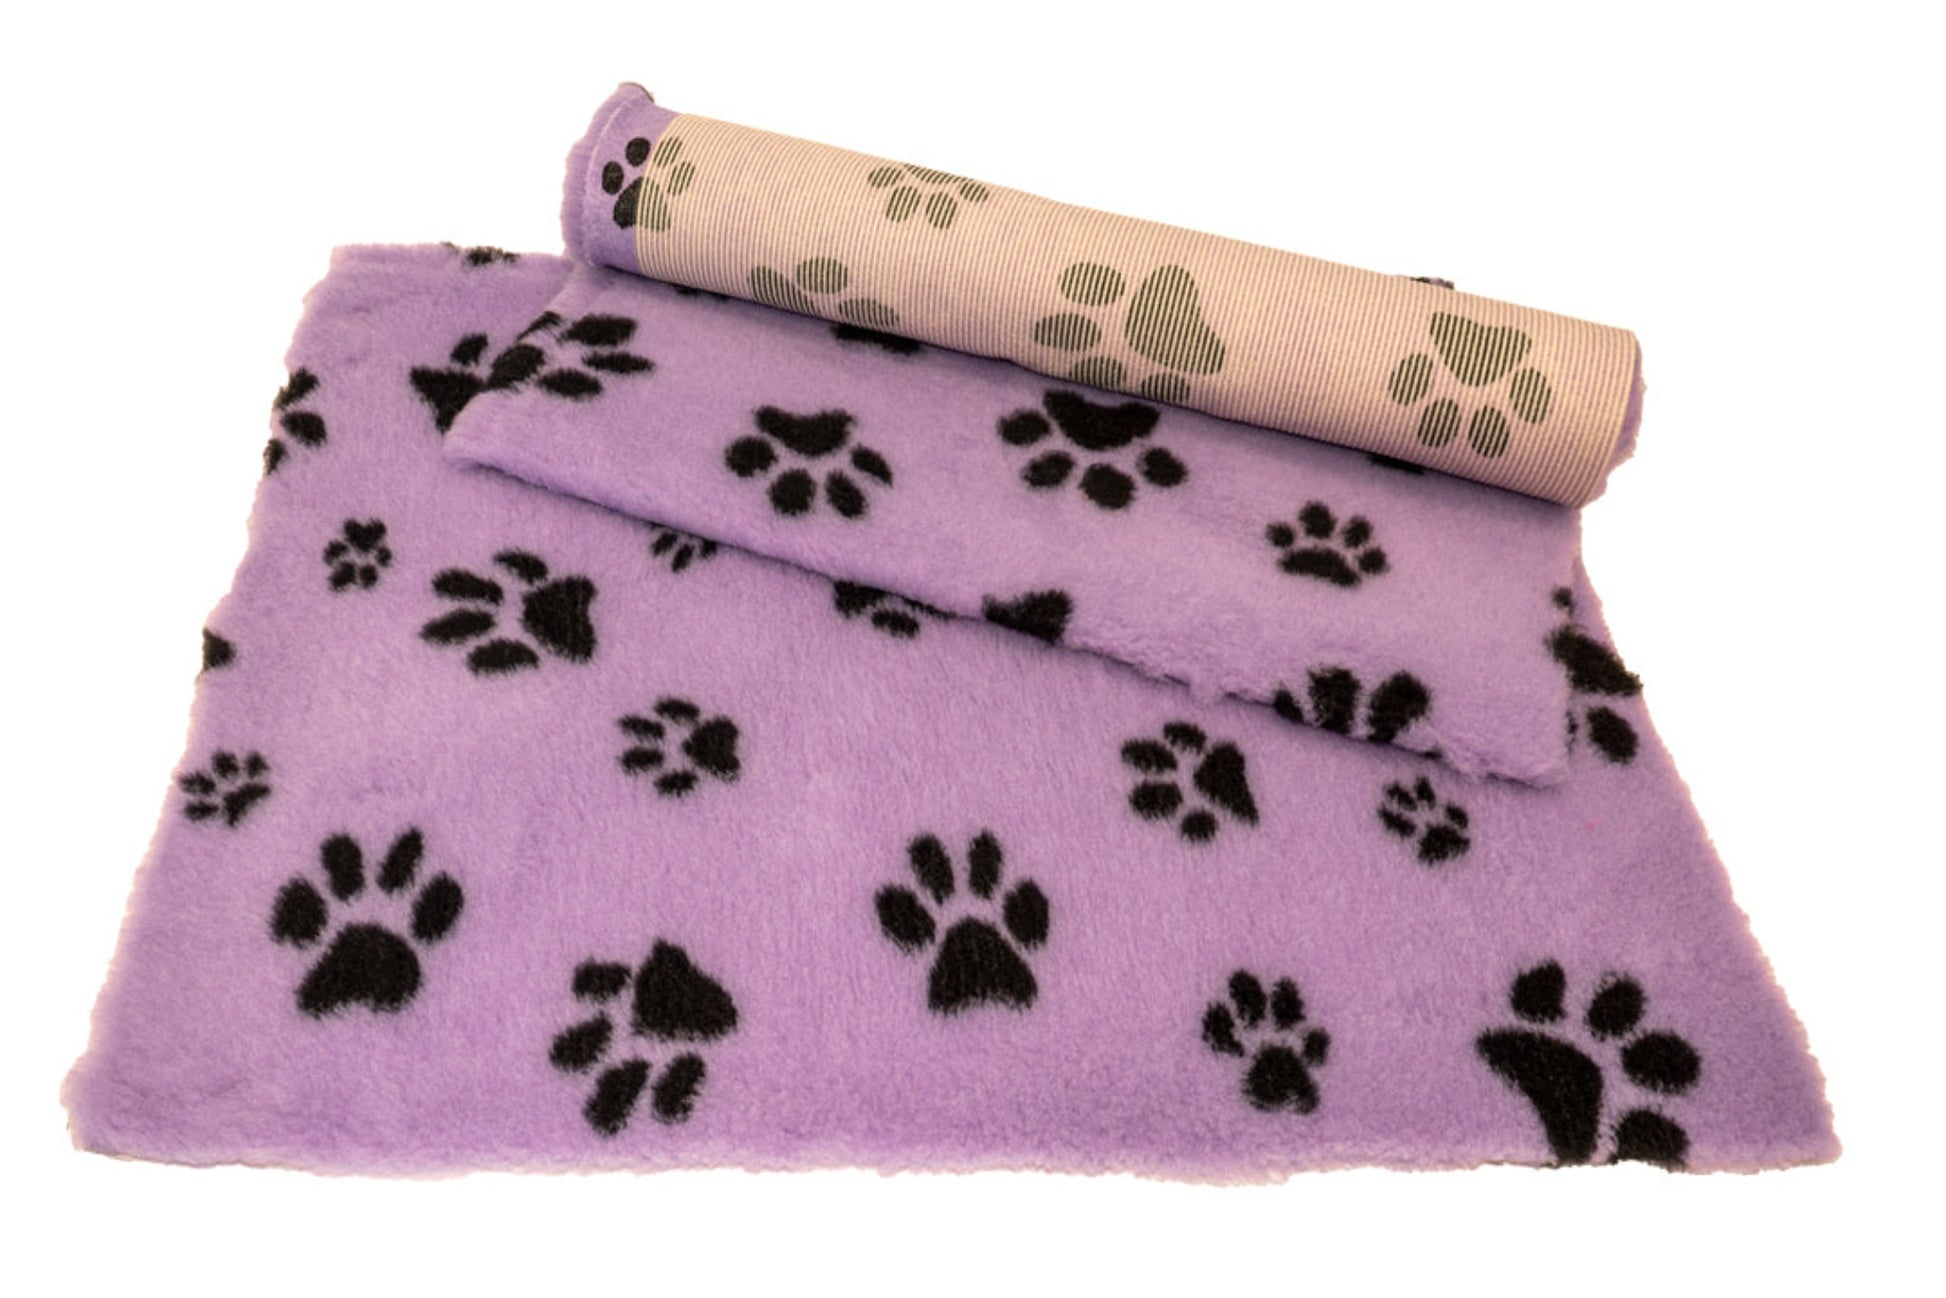 Vet Bed - Rubber Backed - Lilac with Black Designer Paws